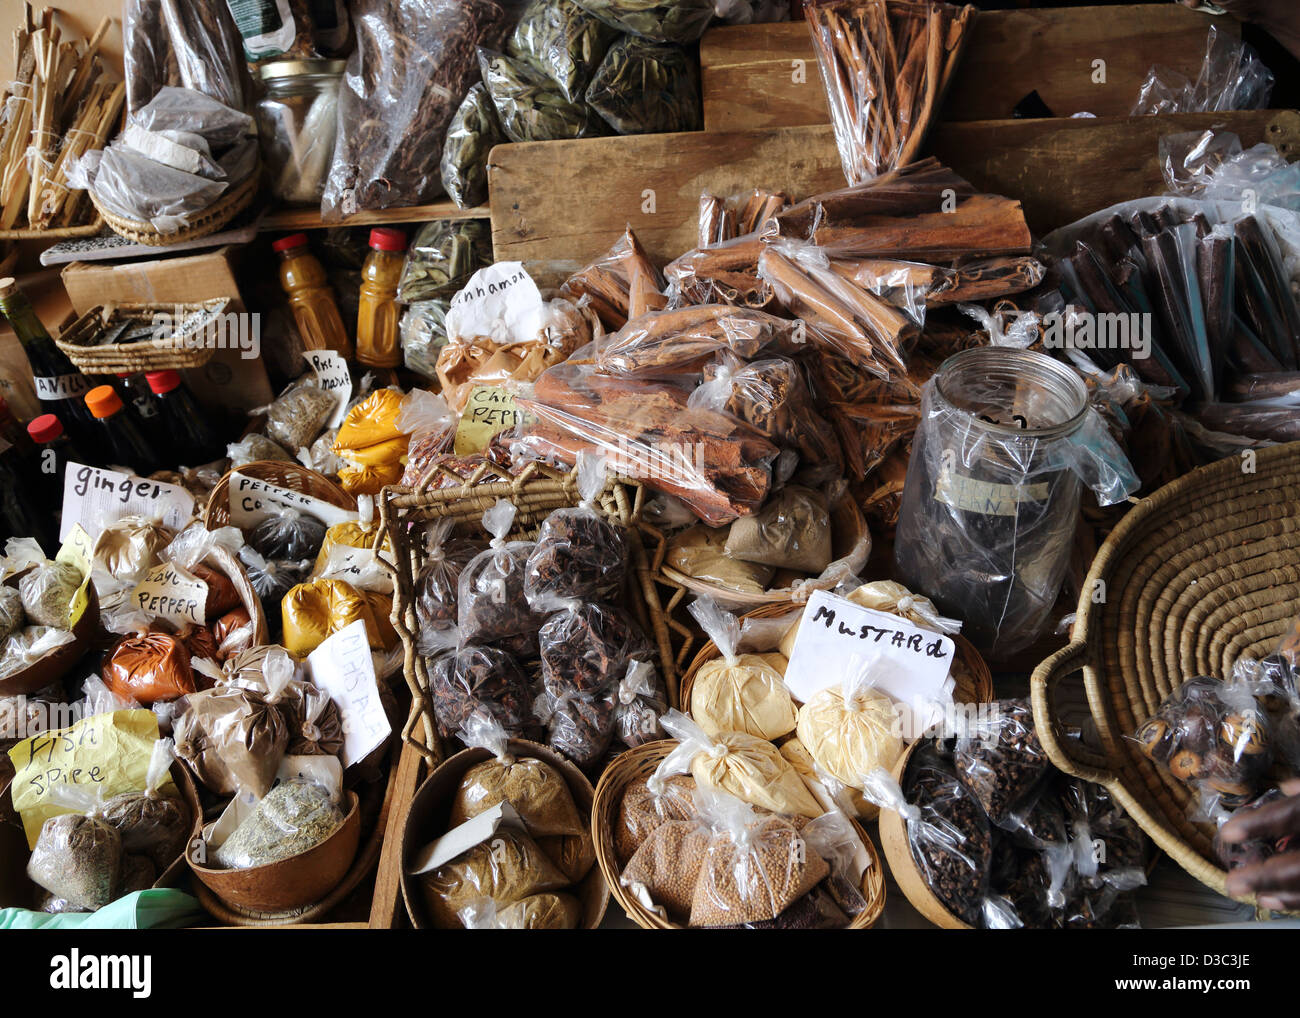 SPICE STALL,CASTRIES CENTRAL MARKET,ST.LUCIA Stock Photo